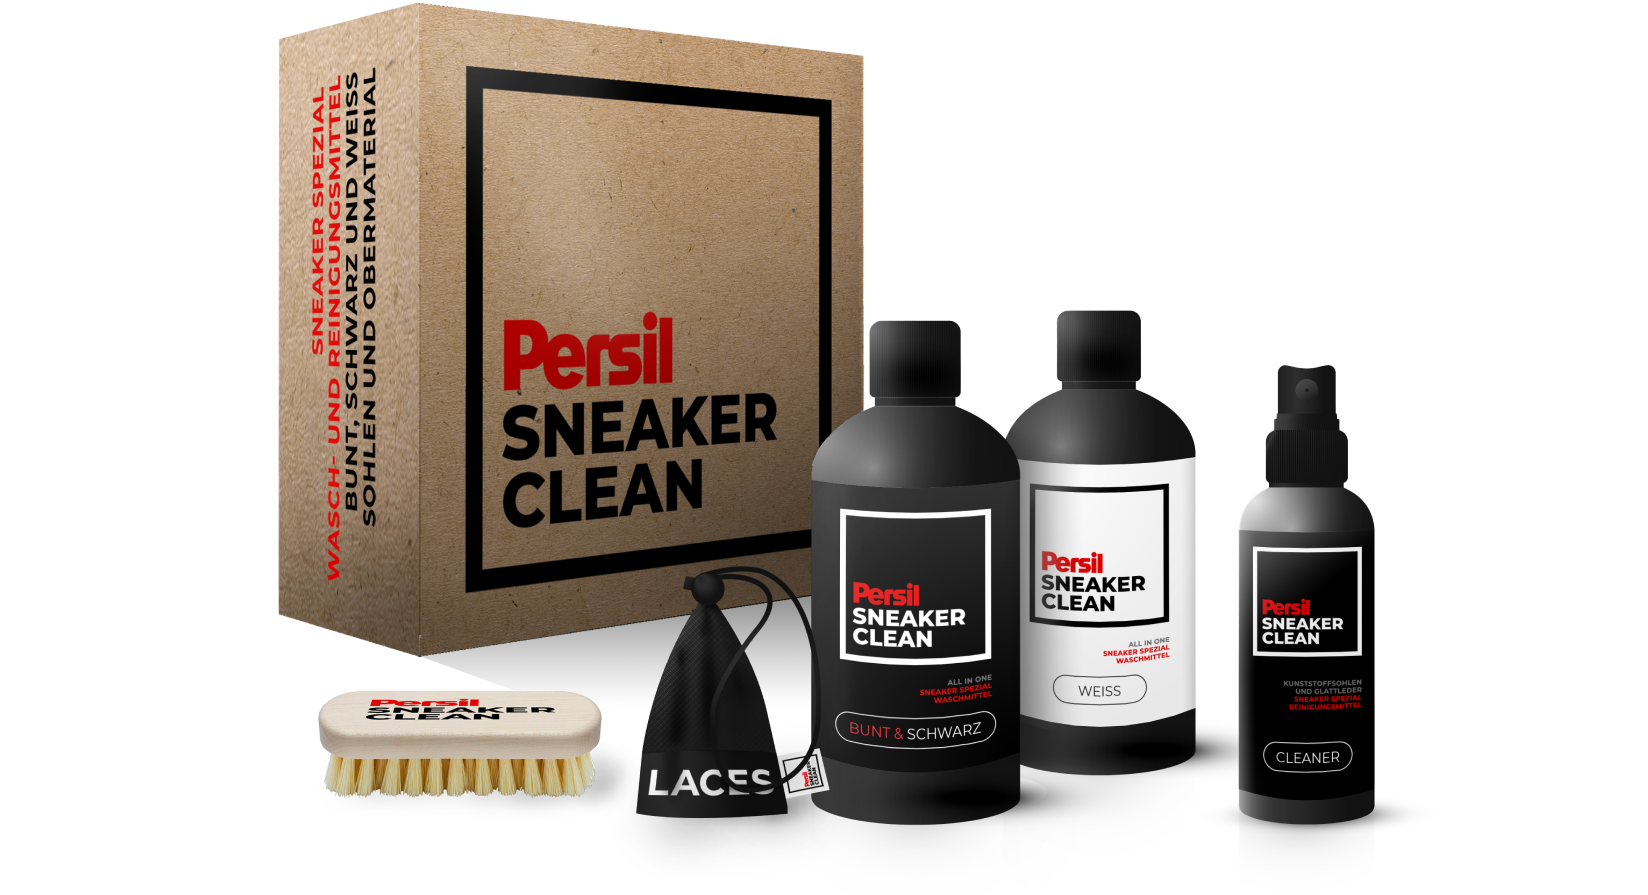 The Product contains several different pieces to clean your sneakers accordingly.